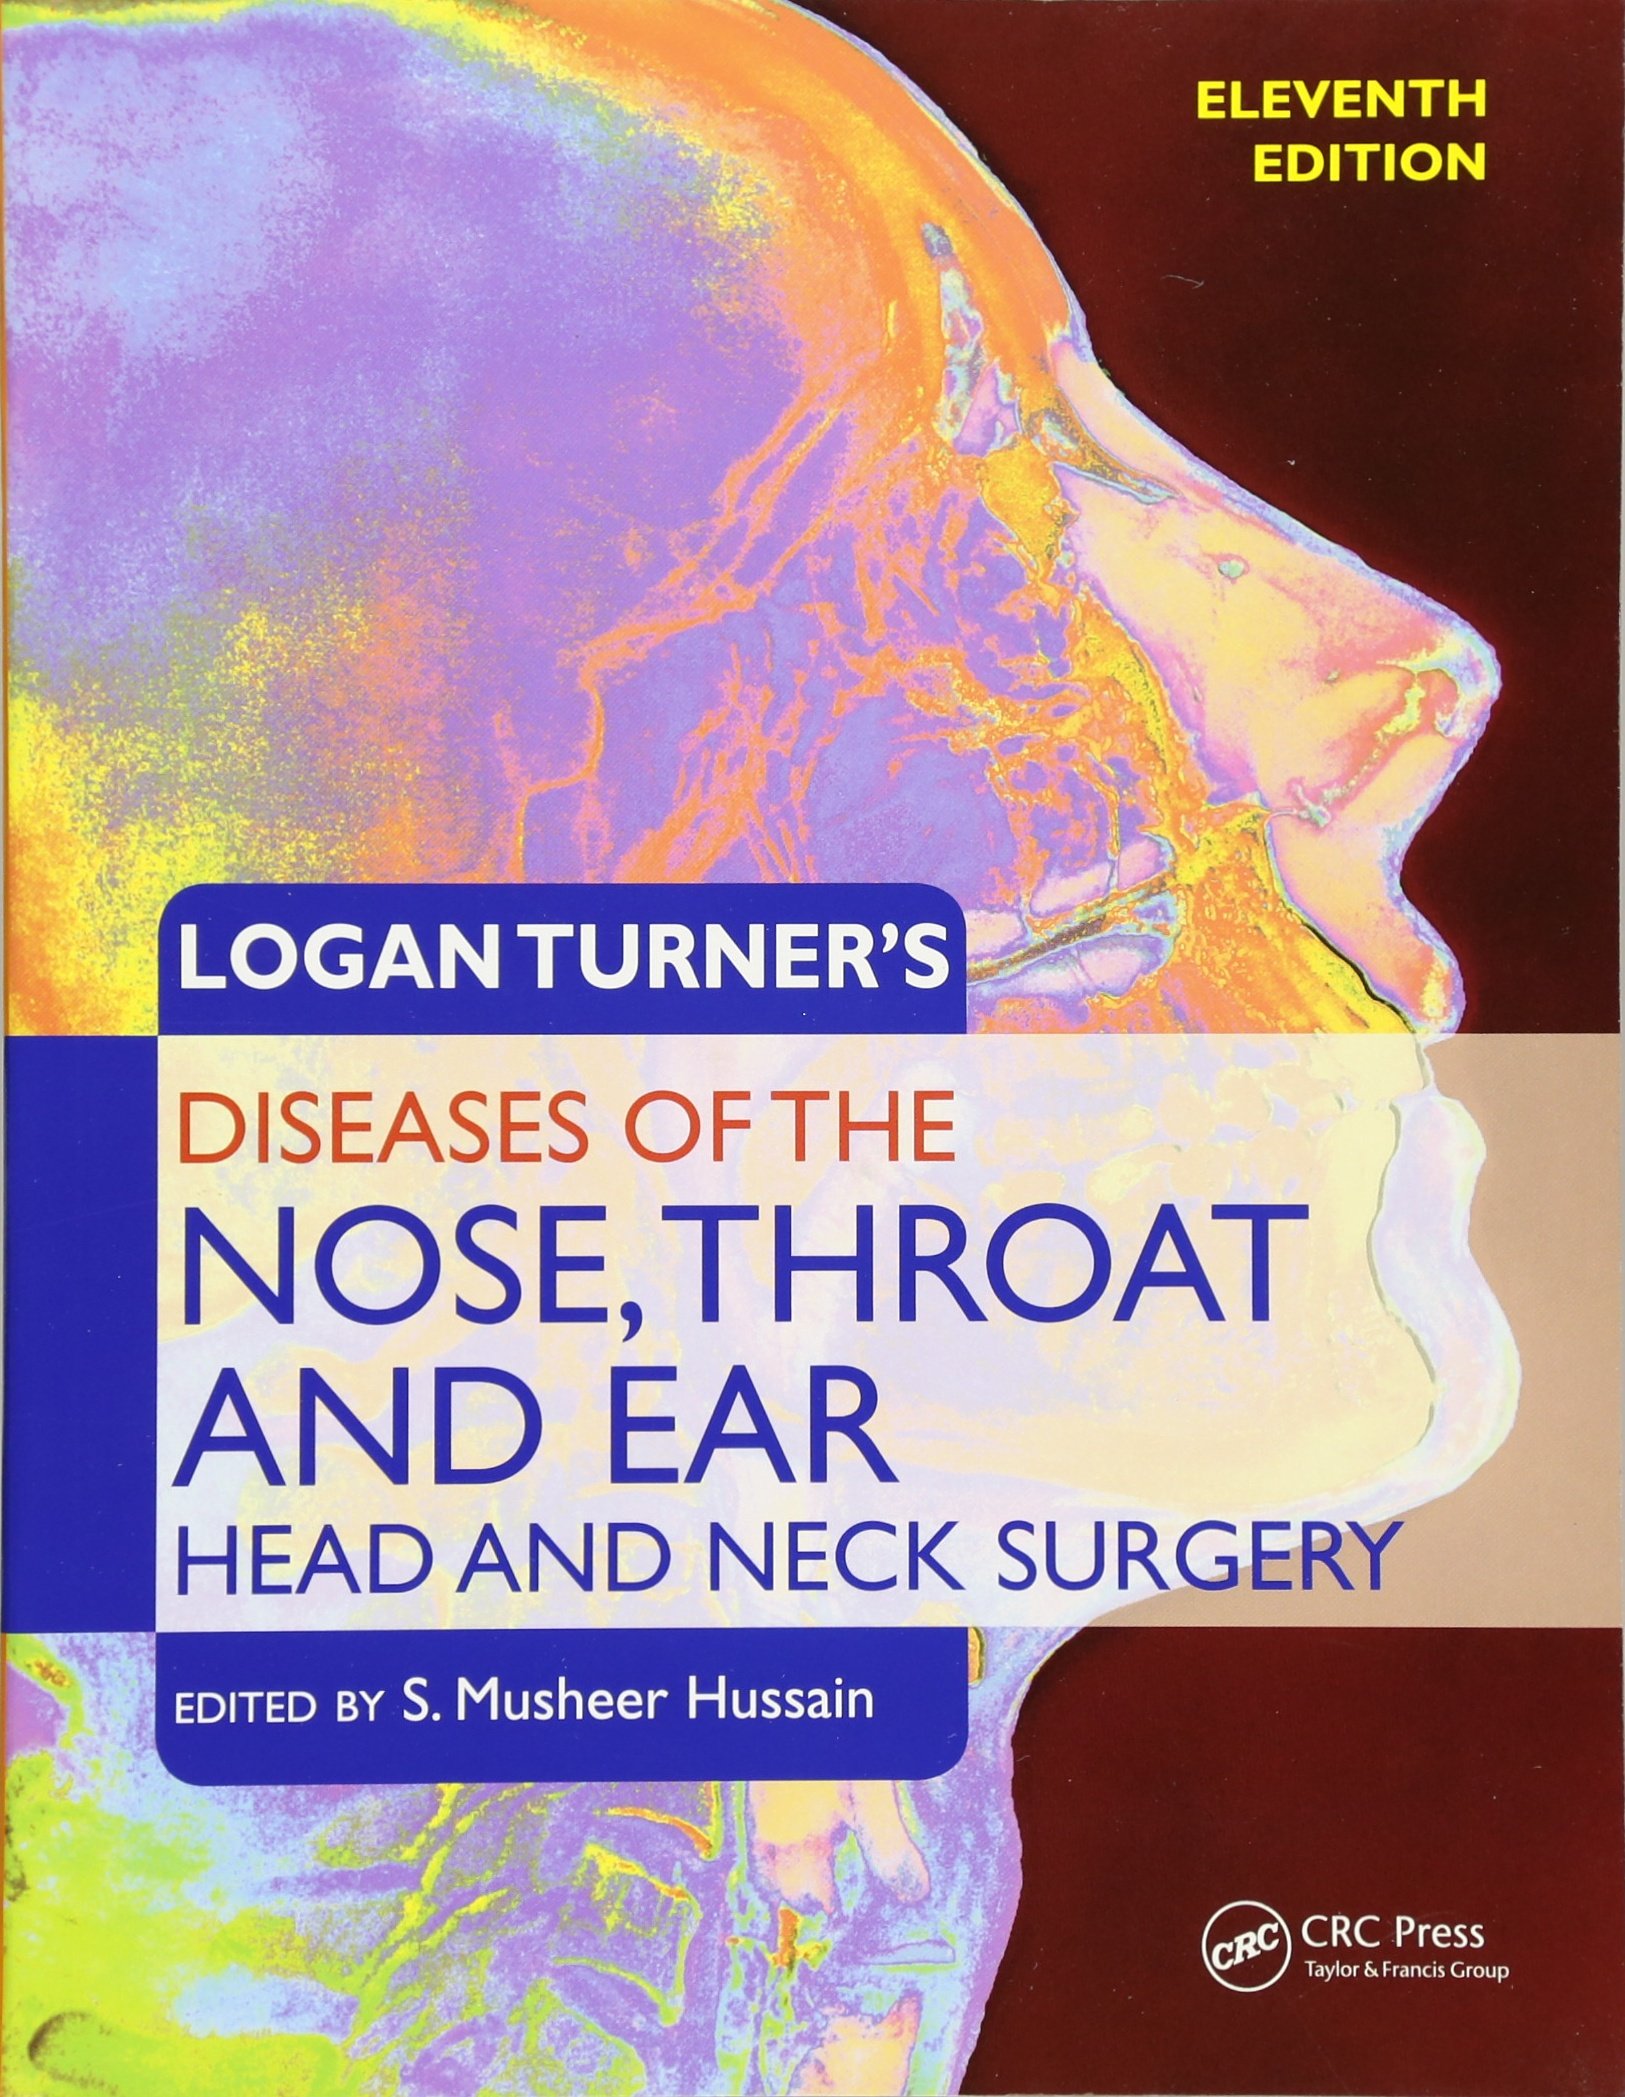 Logan Turner'S Diseases Of The Nose, Throat And Ear Head And Neck Surgery